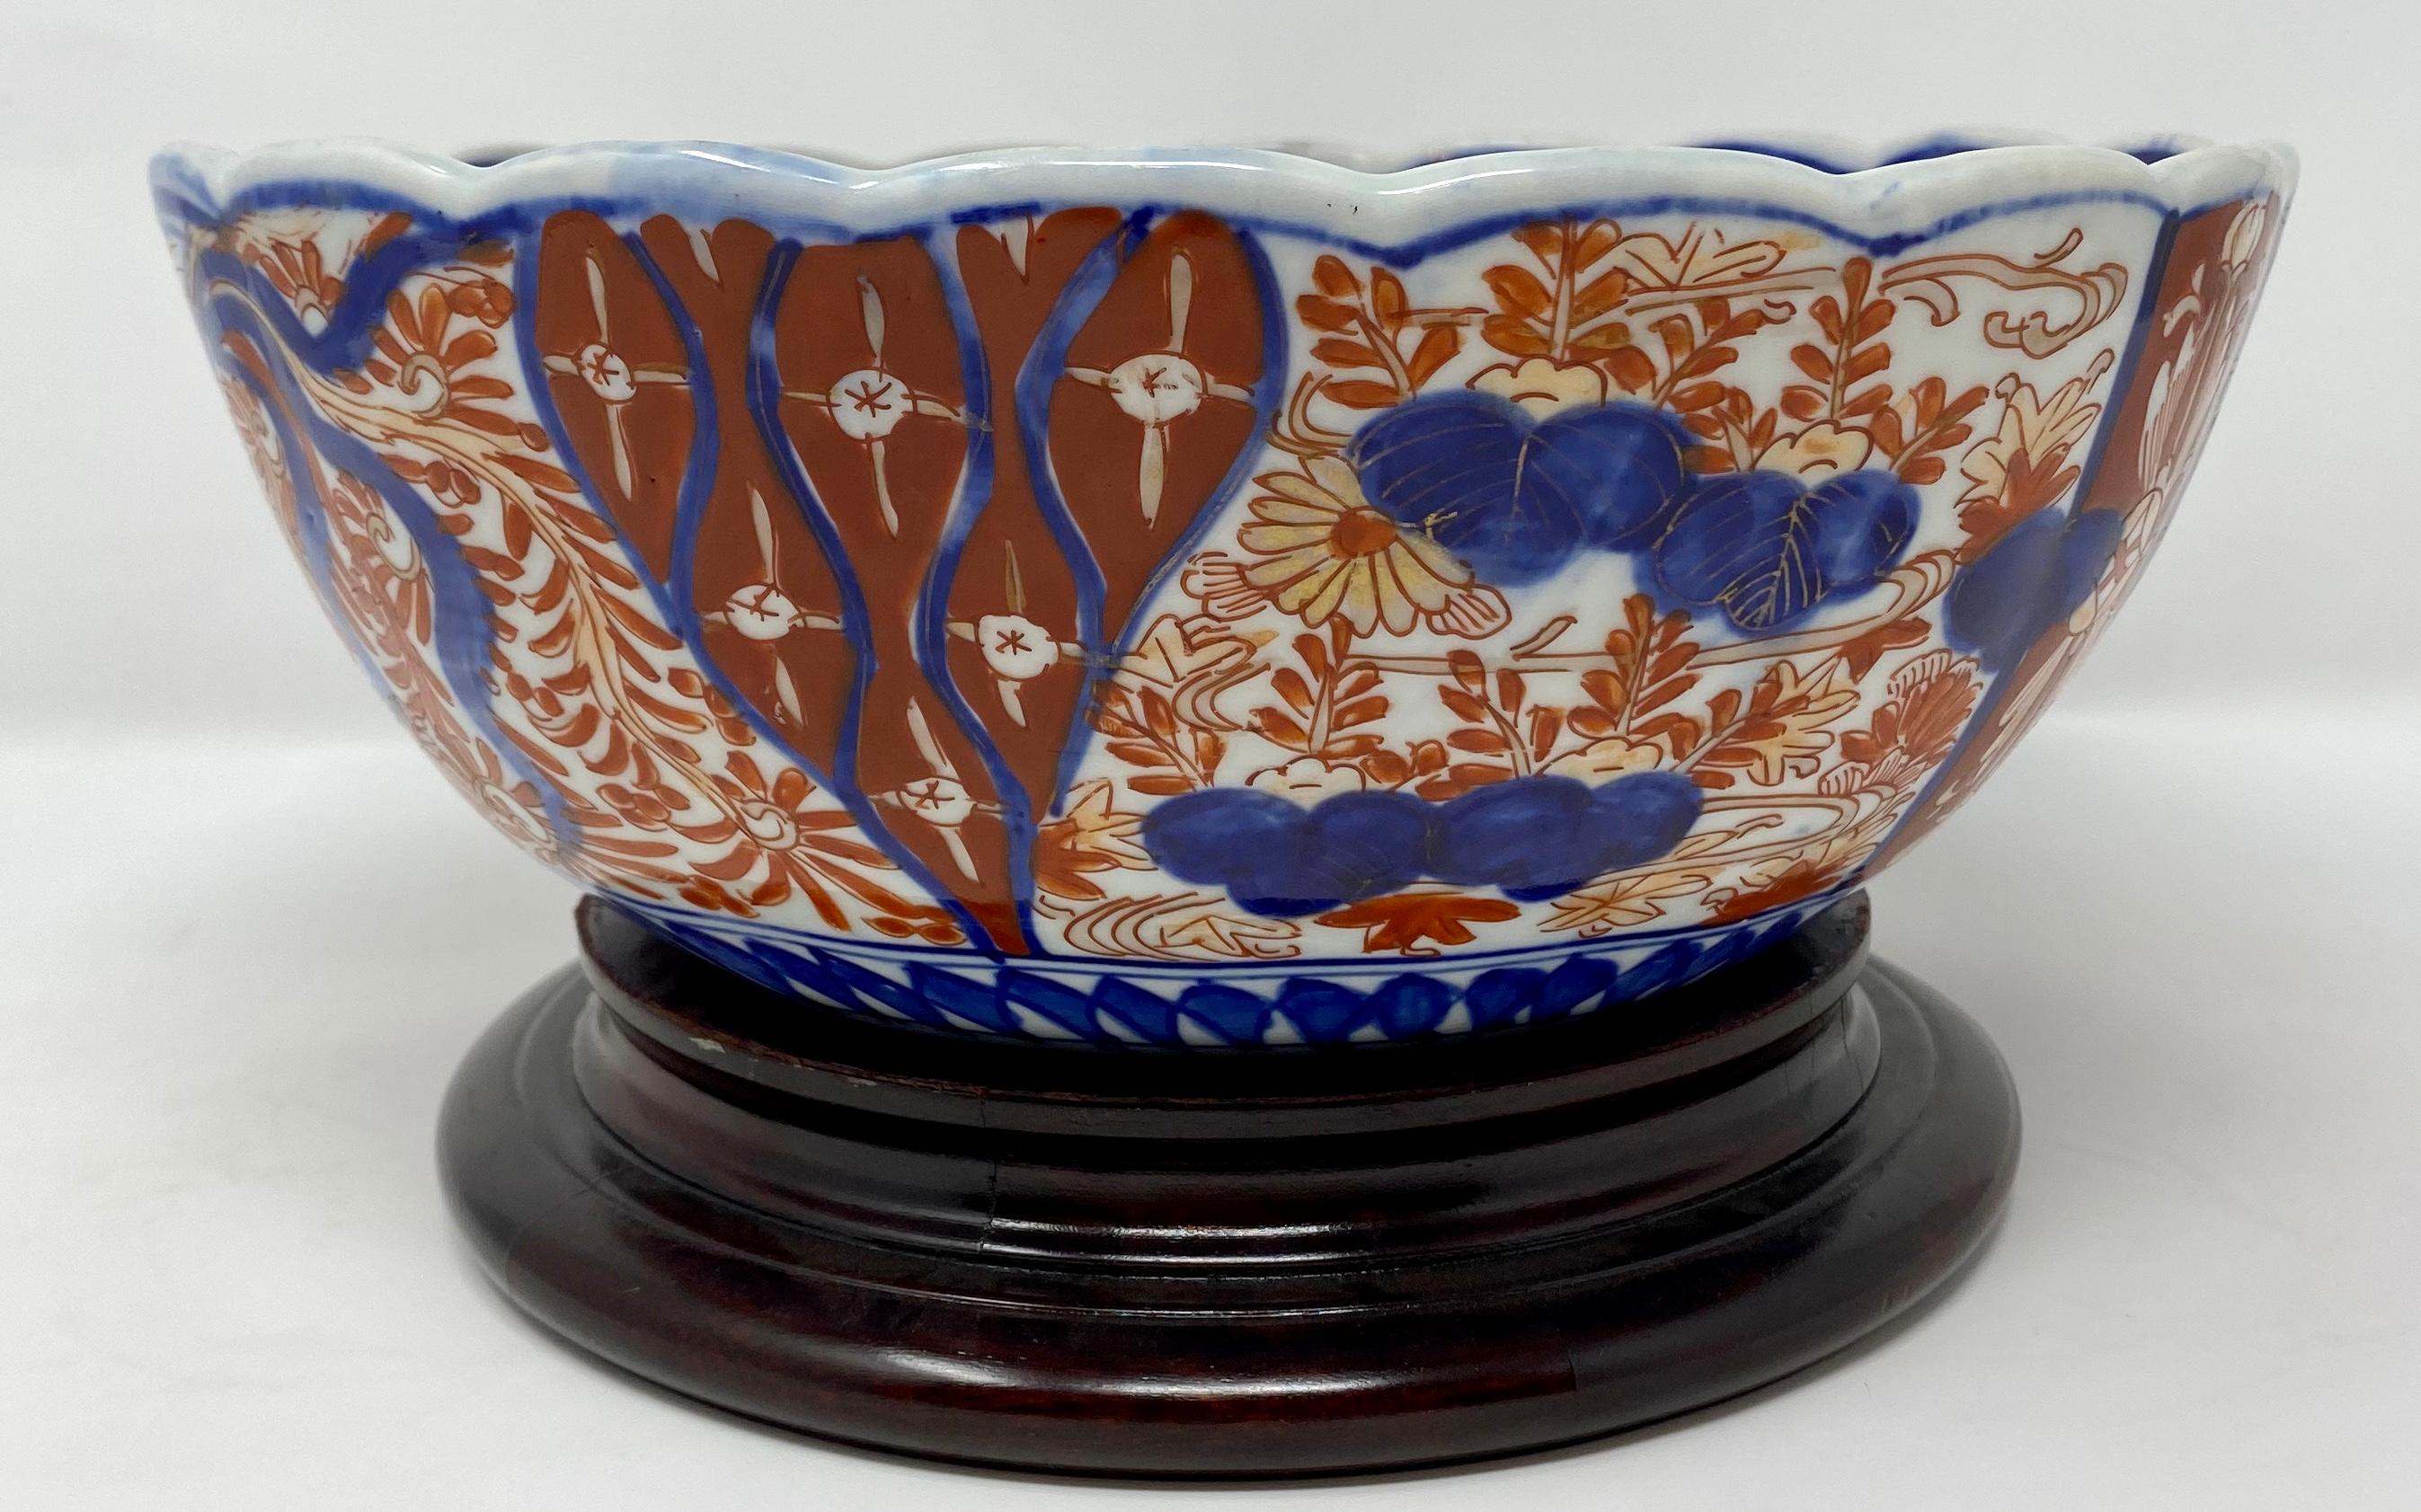 The beauty of Imari cannot be denied and the strong color palette is very appealing.
   